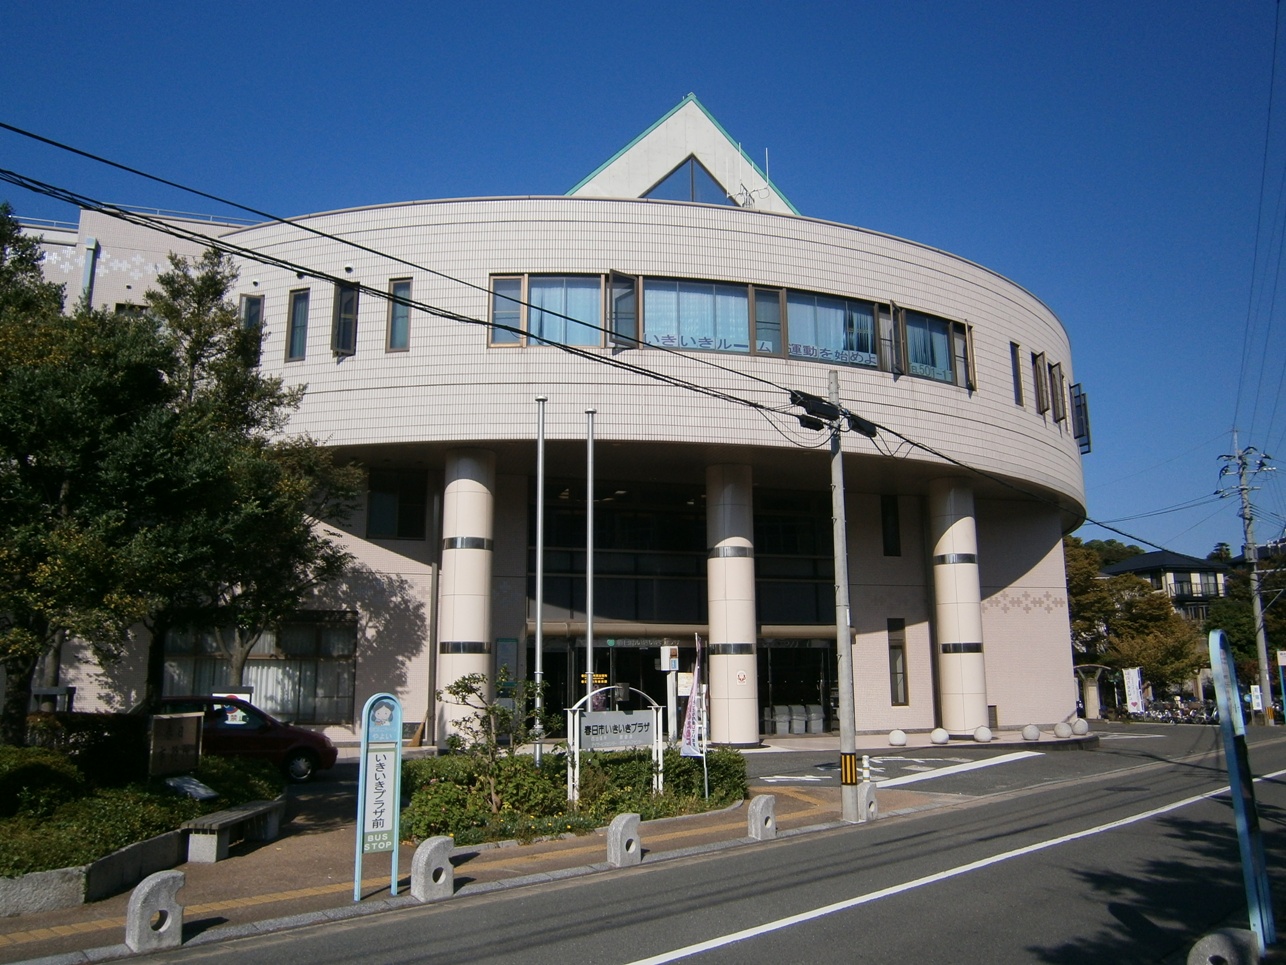 Government office. 180m to Kasuga city hall west branch office (lively Plaza) (office)